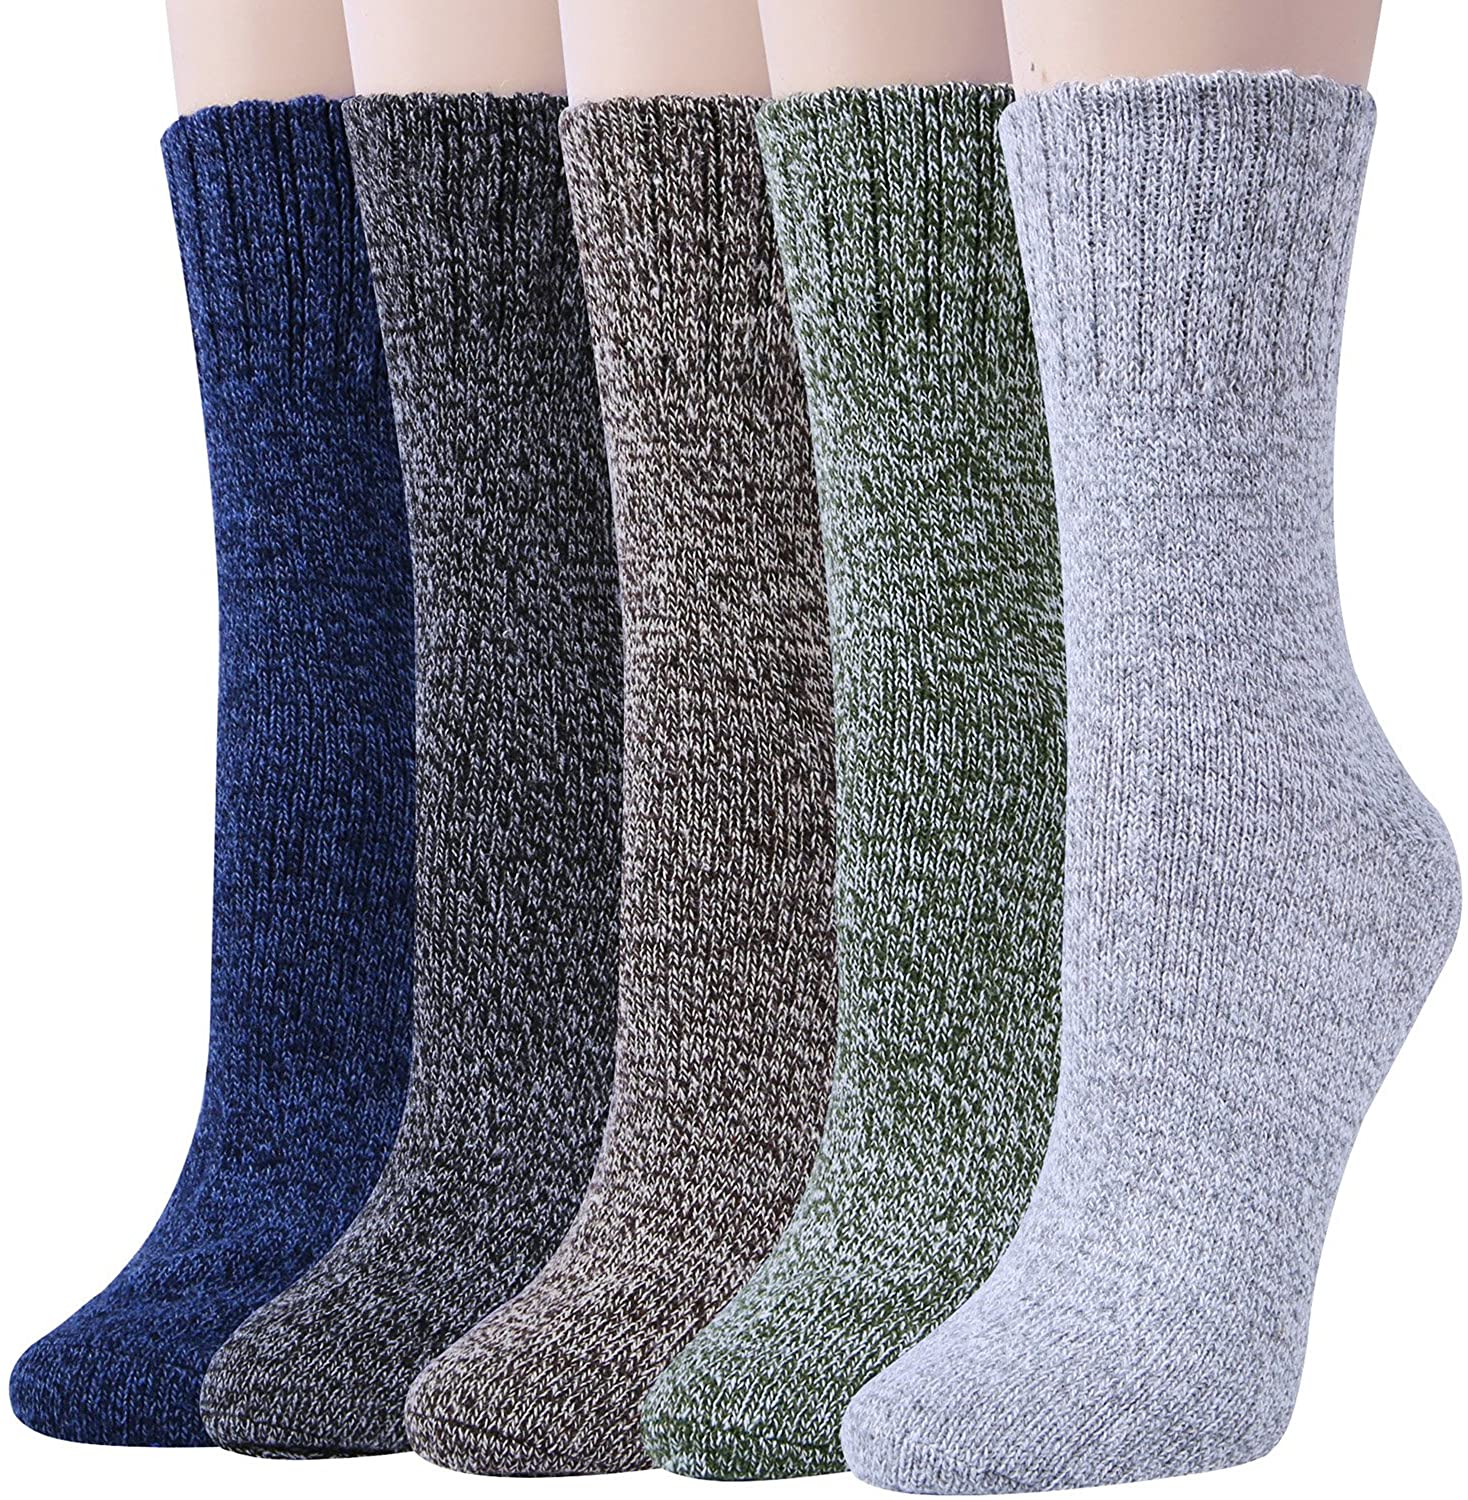 Justay 6 Pairs Thermal Wool Socks for Women Knit Vintage Warm Socks Winter Casual Thick Cozy Socks Gifts